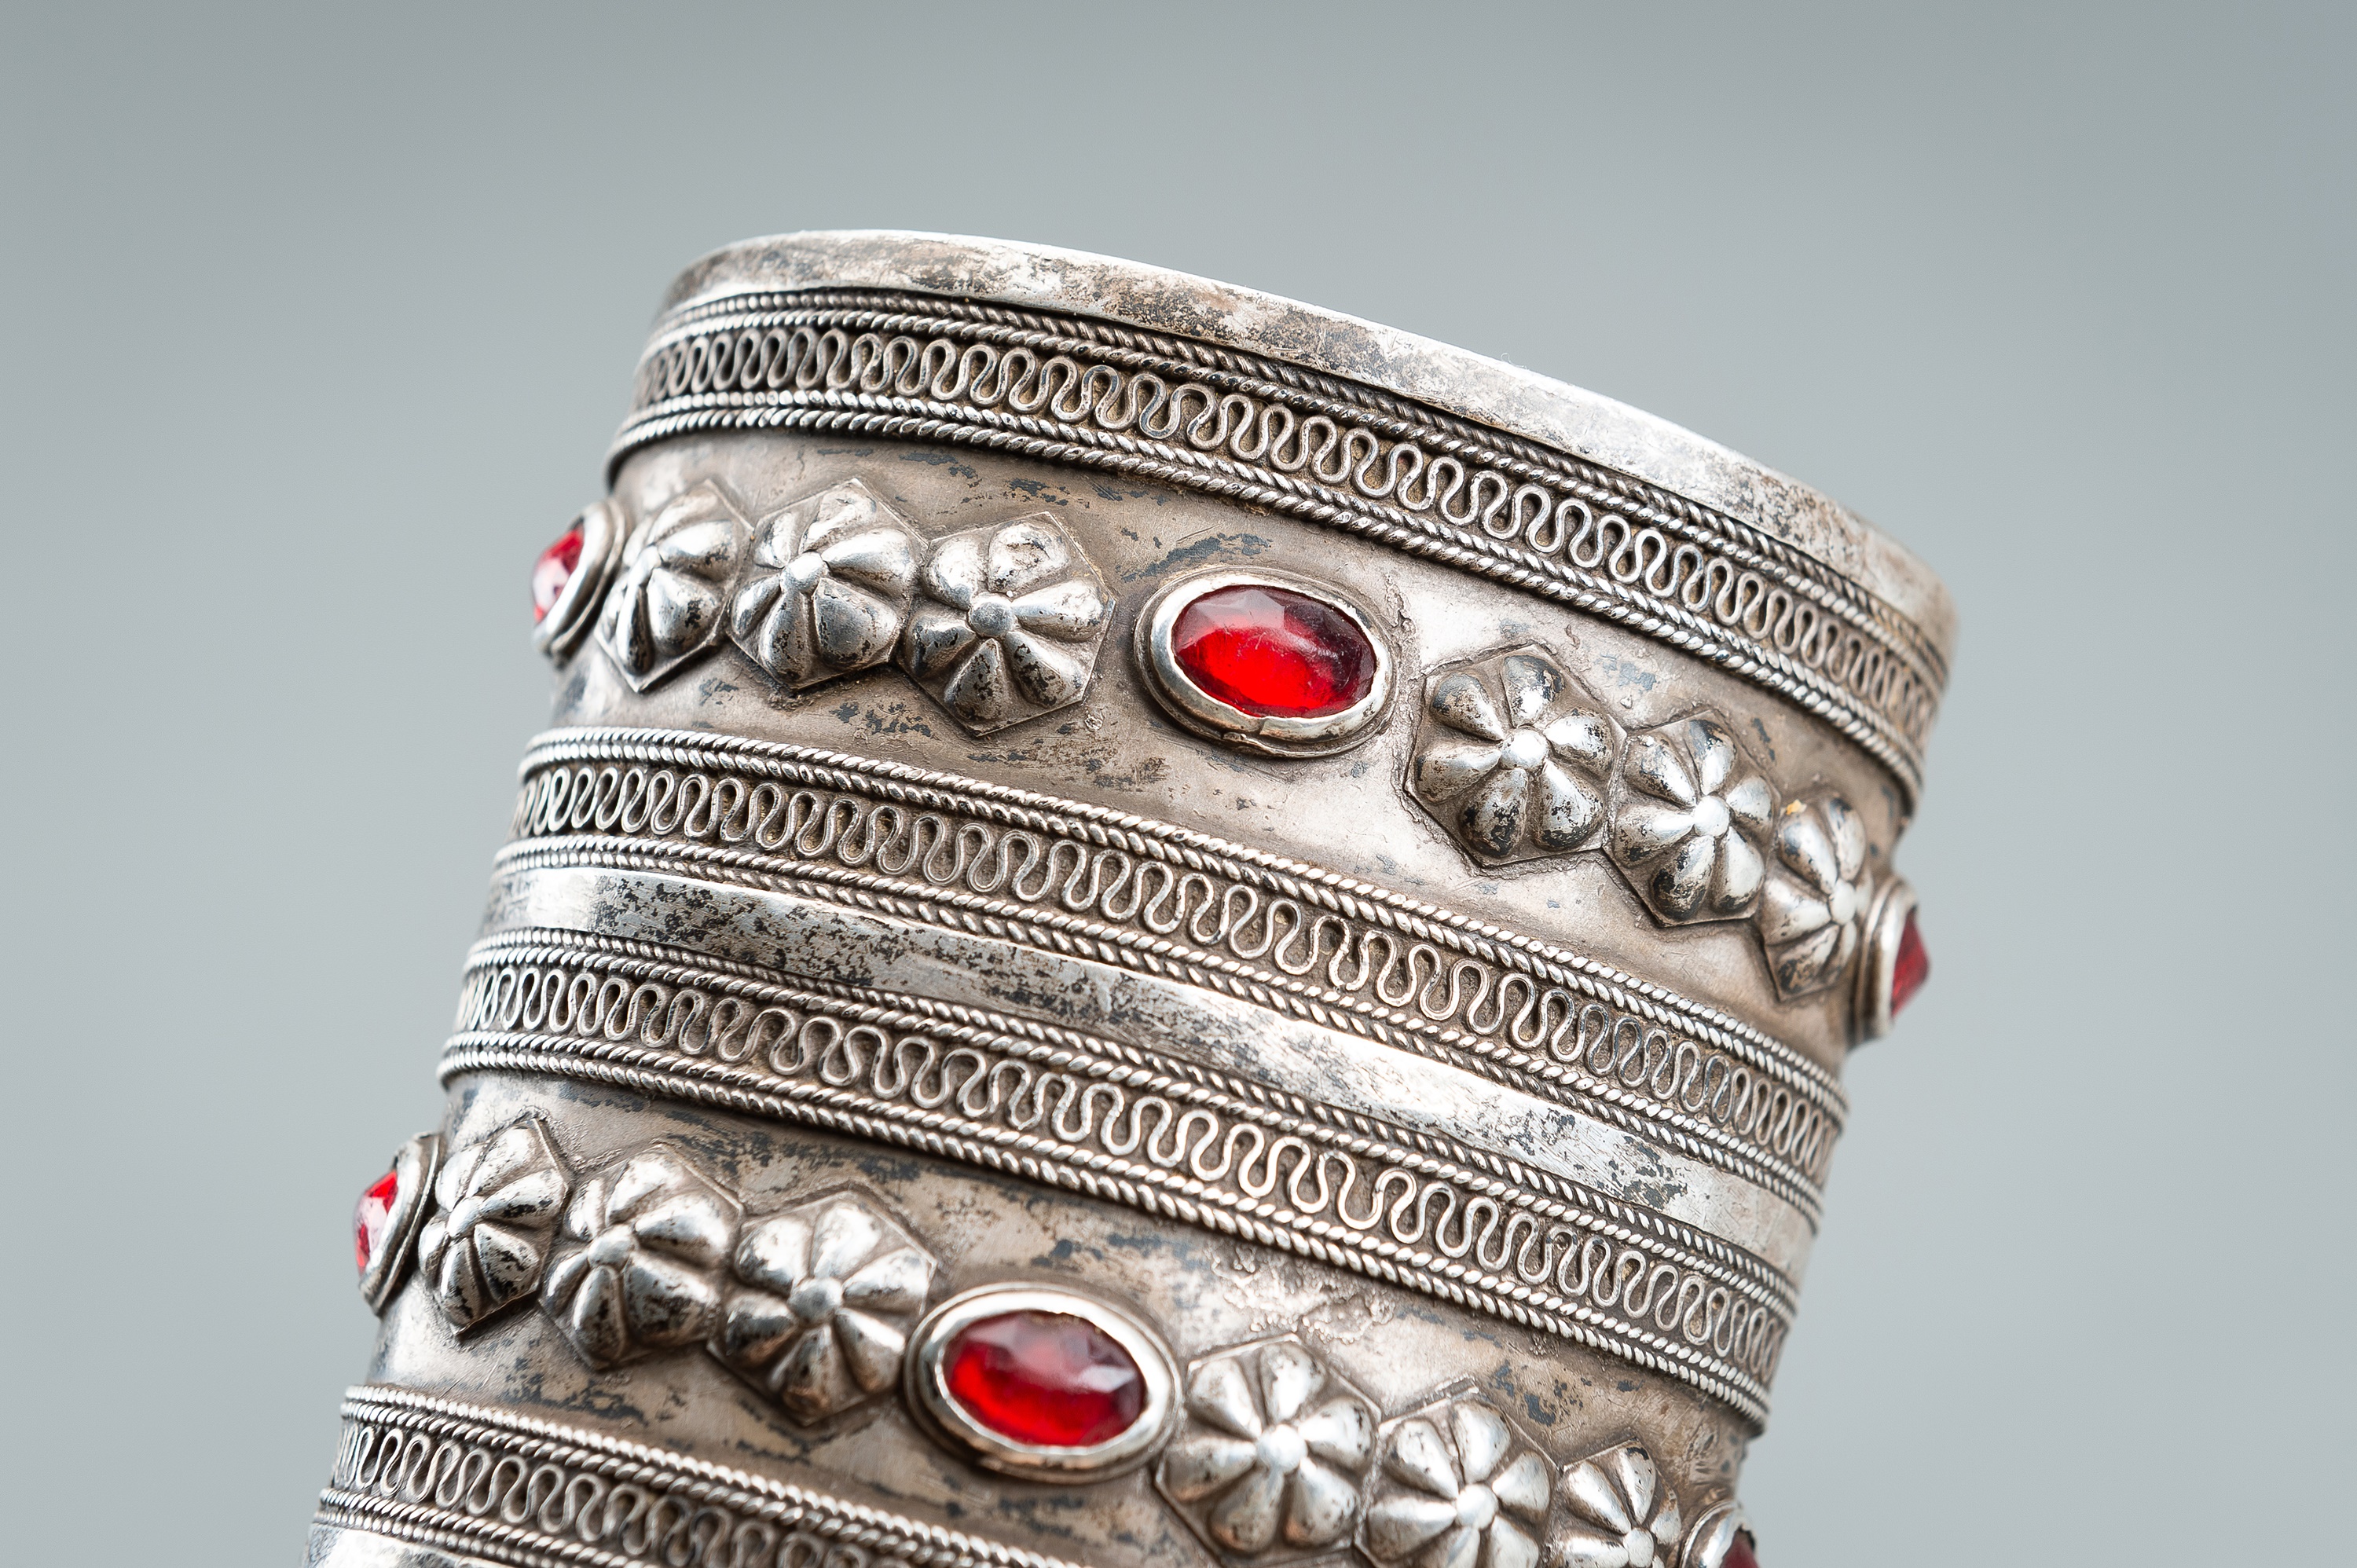 A PAIR OF TURKOMAN GLASS INSET SILVER BRACELETS, c. 1900s - Image 3 of 12